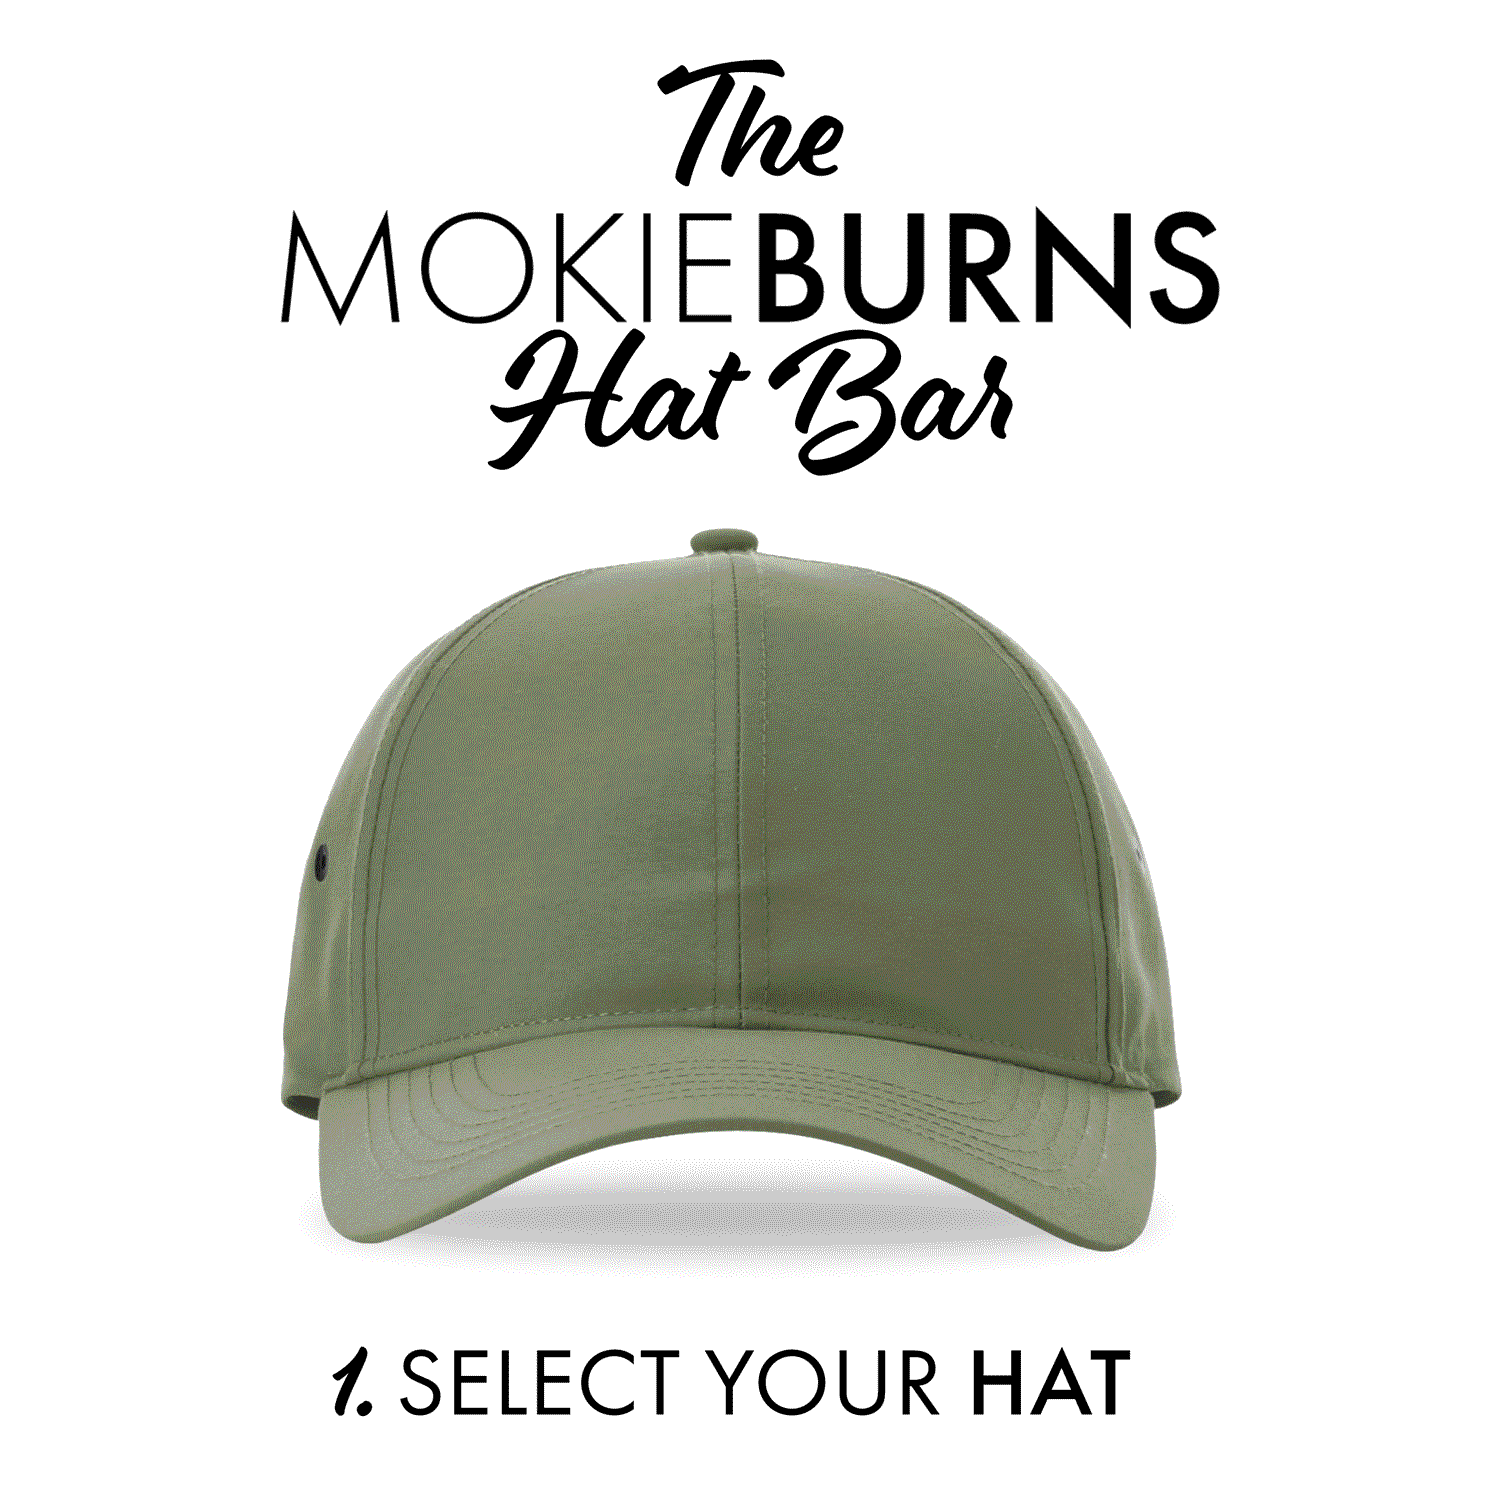 Choose your favorite hat fit and favorite fish made of genuine leather to build your own custom hat combination! Mokie Burns fishing hats are the perfect gift for anyone.